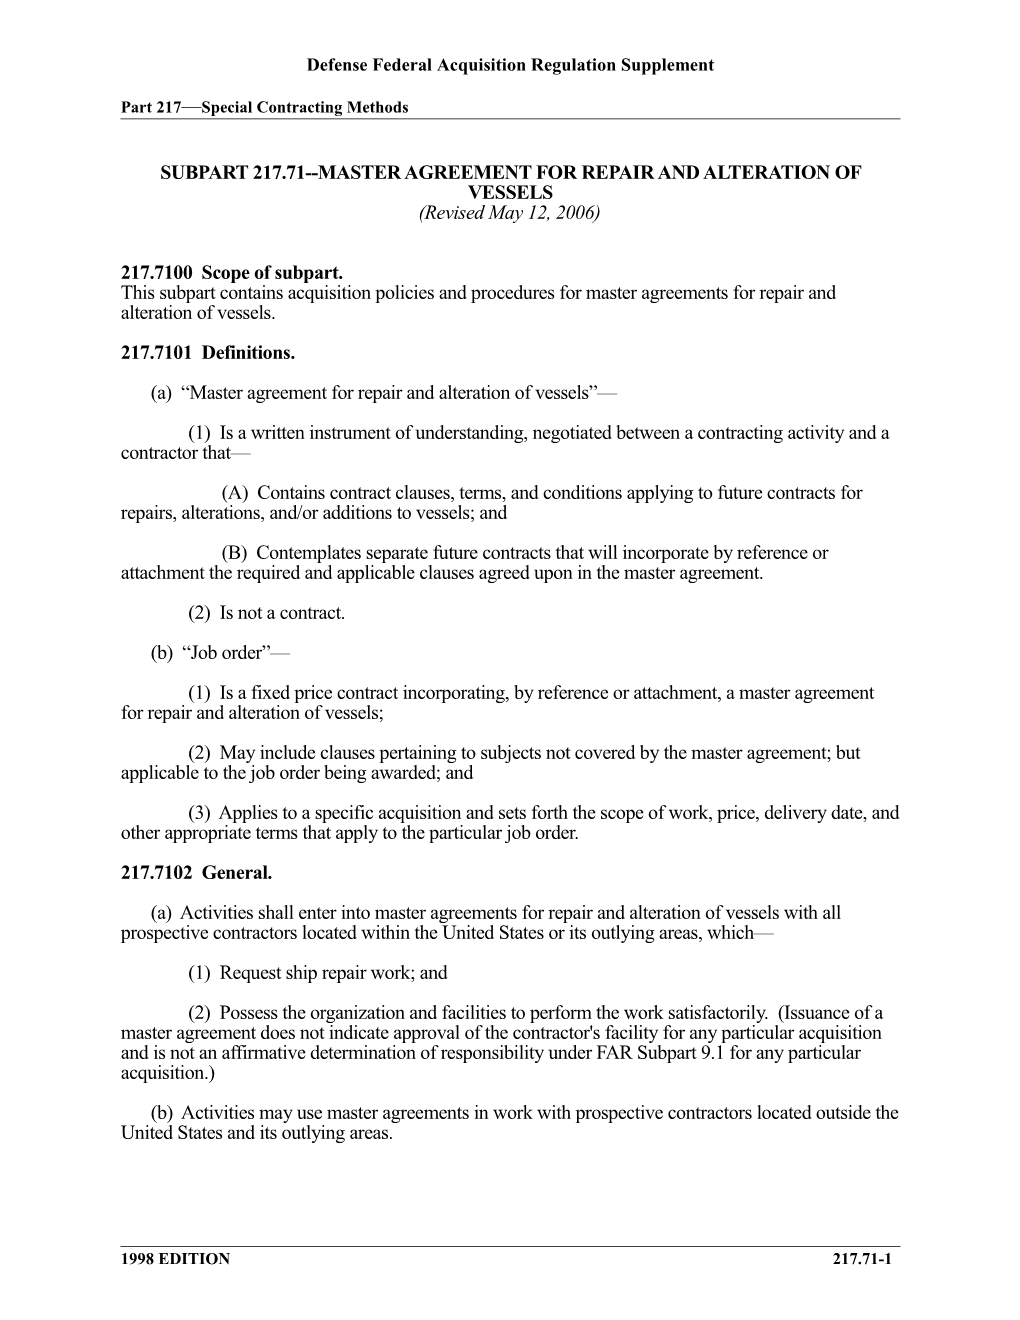 Subpart 217.71 Master Agreement for Repair and Alteration of Vessels